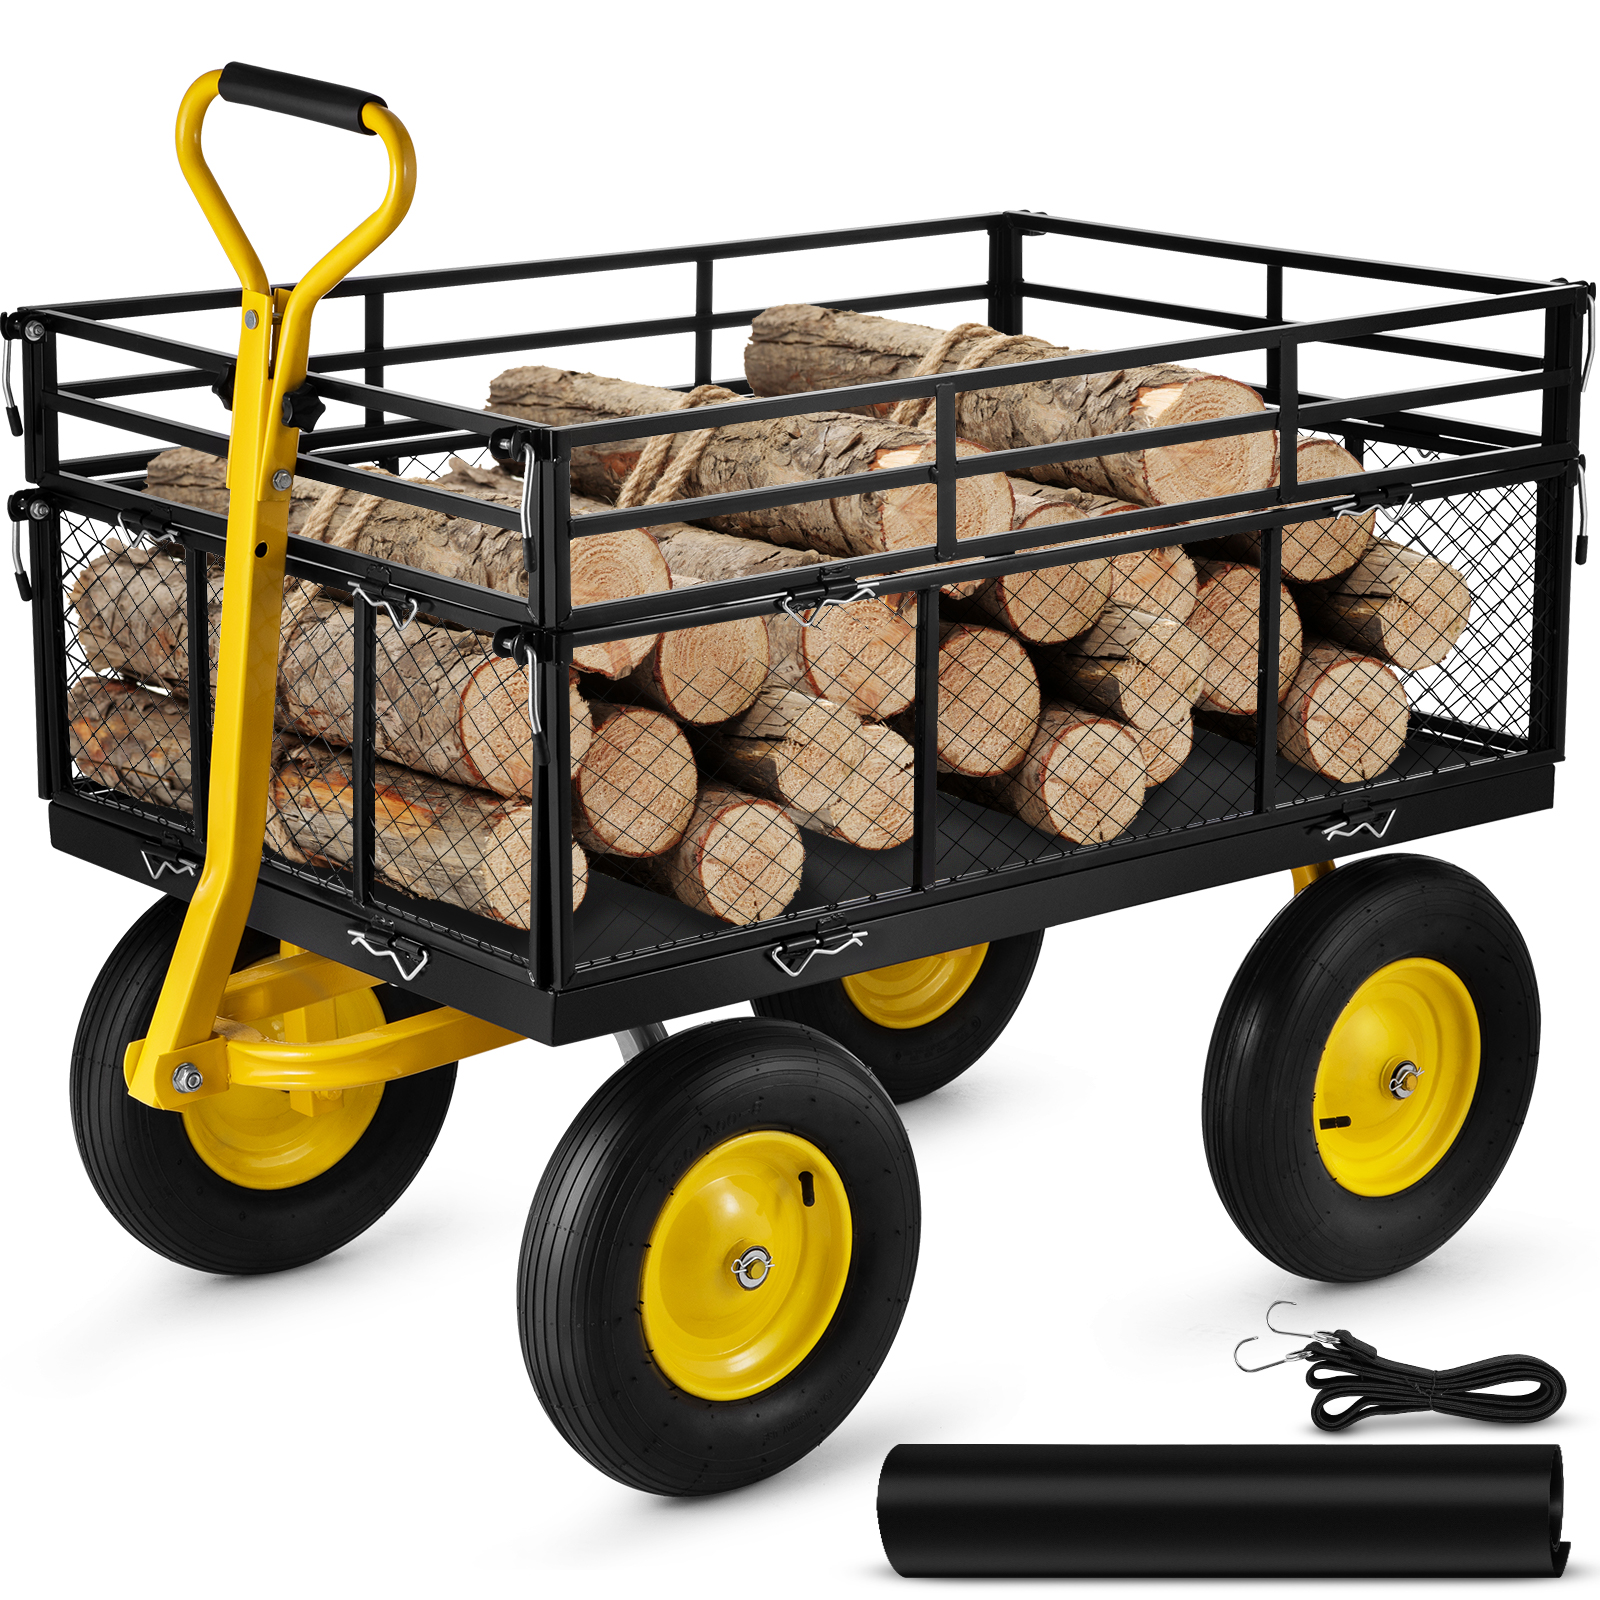 Steel Garden Cart,500-1400 lbs,Removable Sides